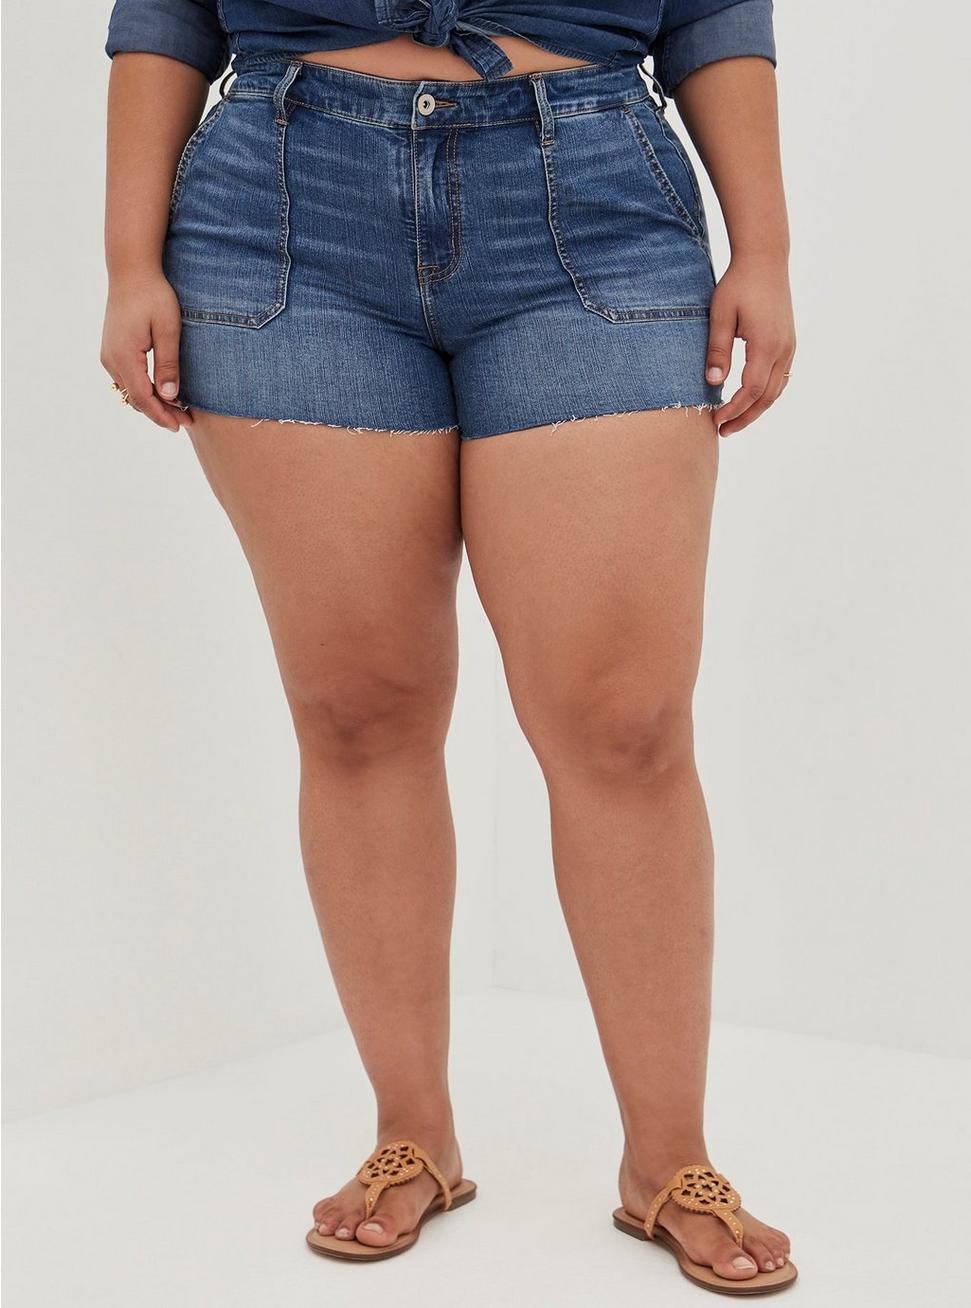 Plus Size 3.5 Inch Vintage Stretch High-Rise Short, IRONIC, hi-res